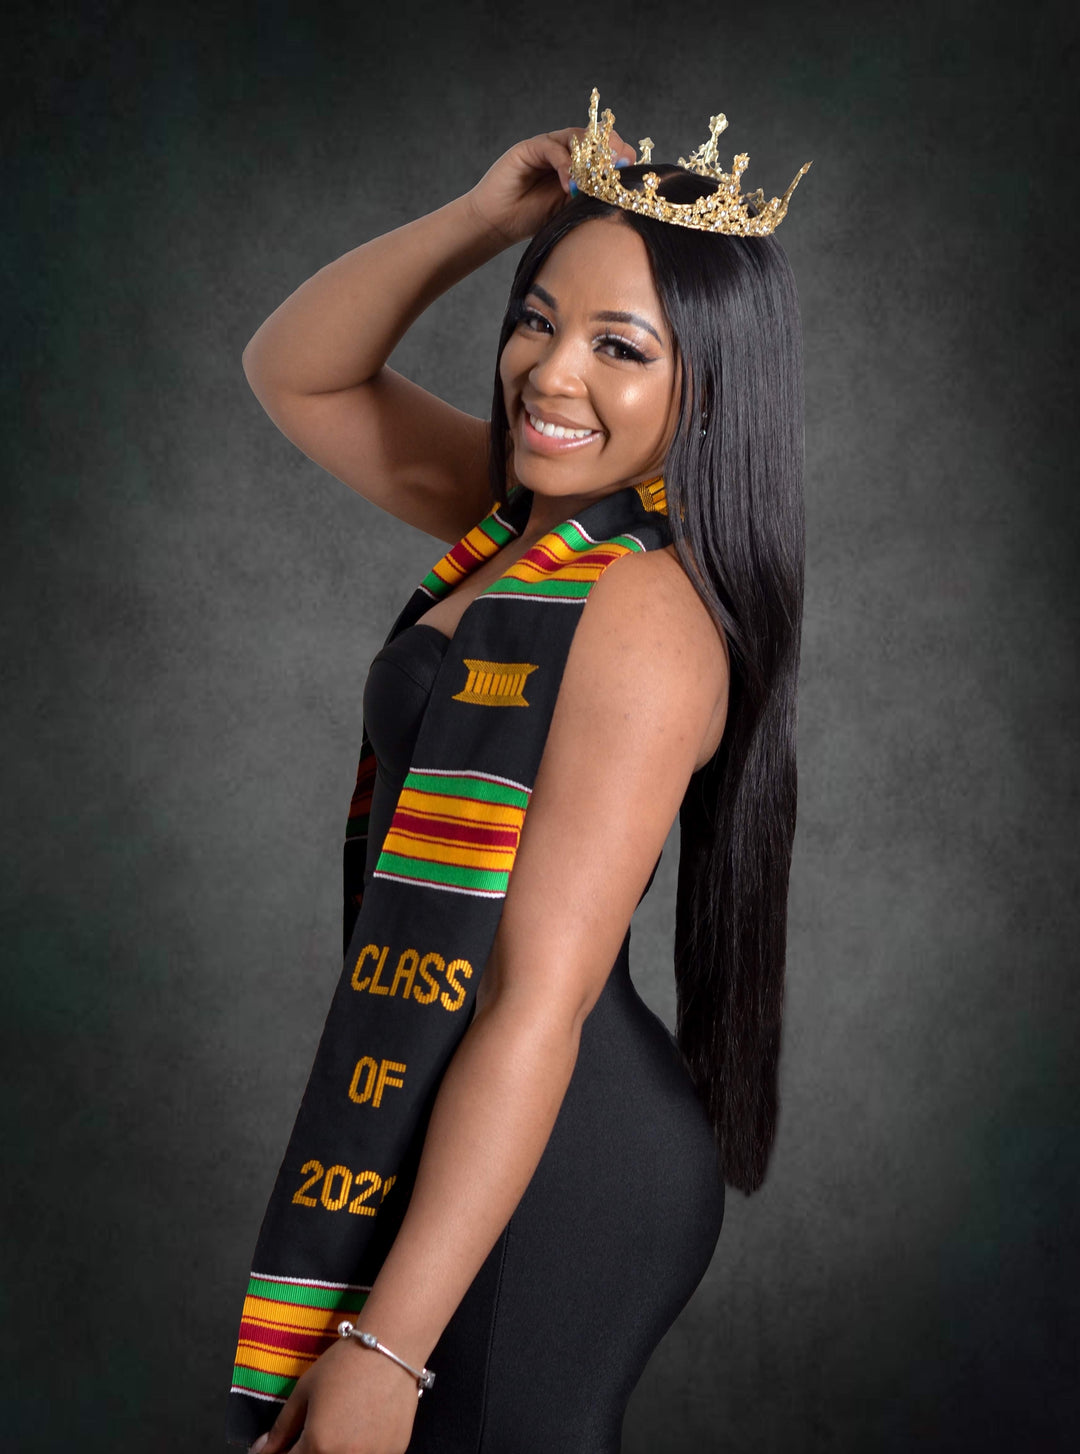 Young, Gifted & Black Class of 2023 Kente Graduation Stole